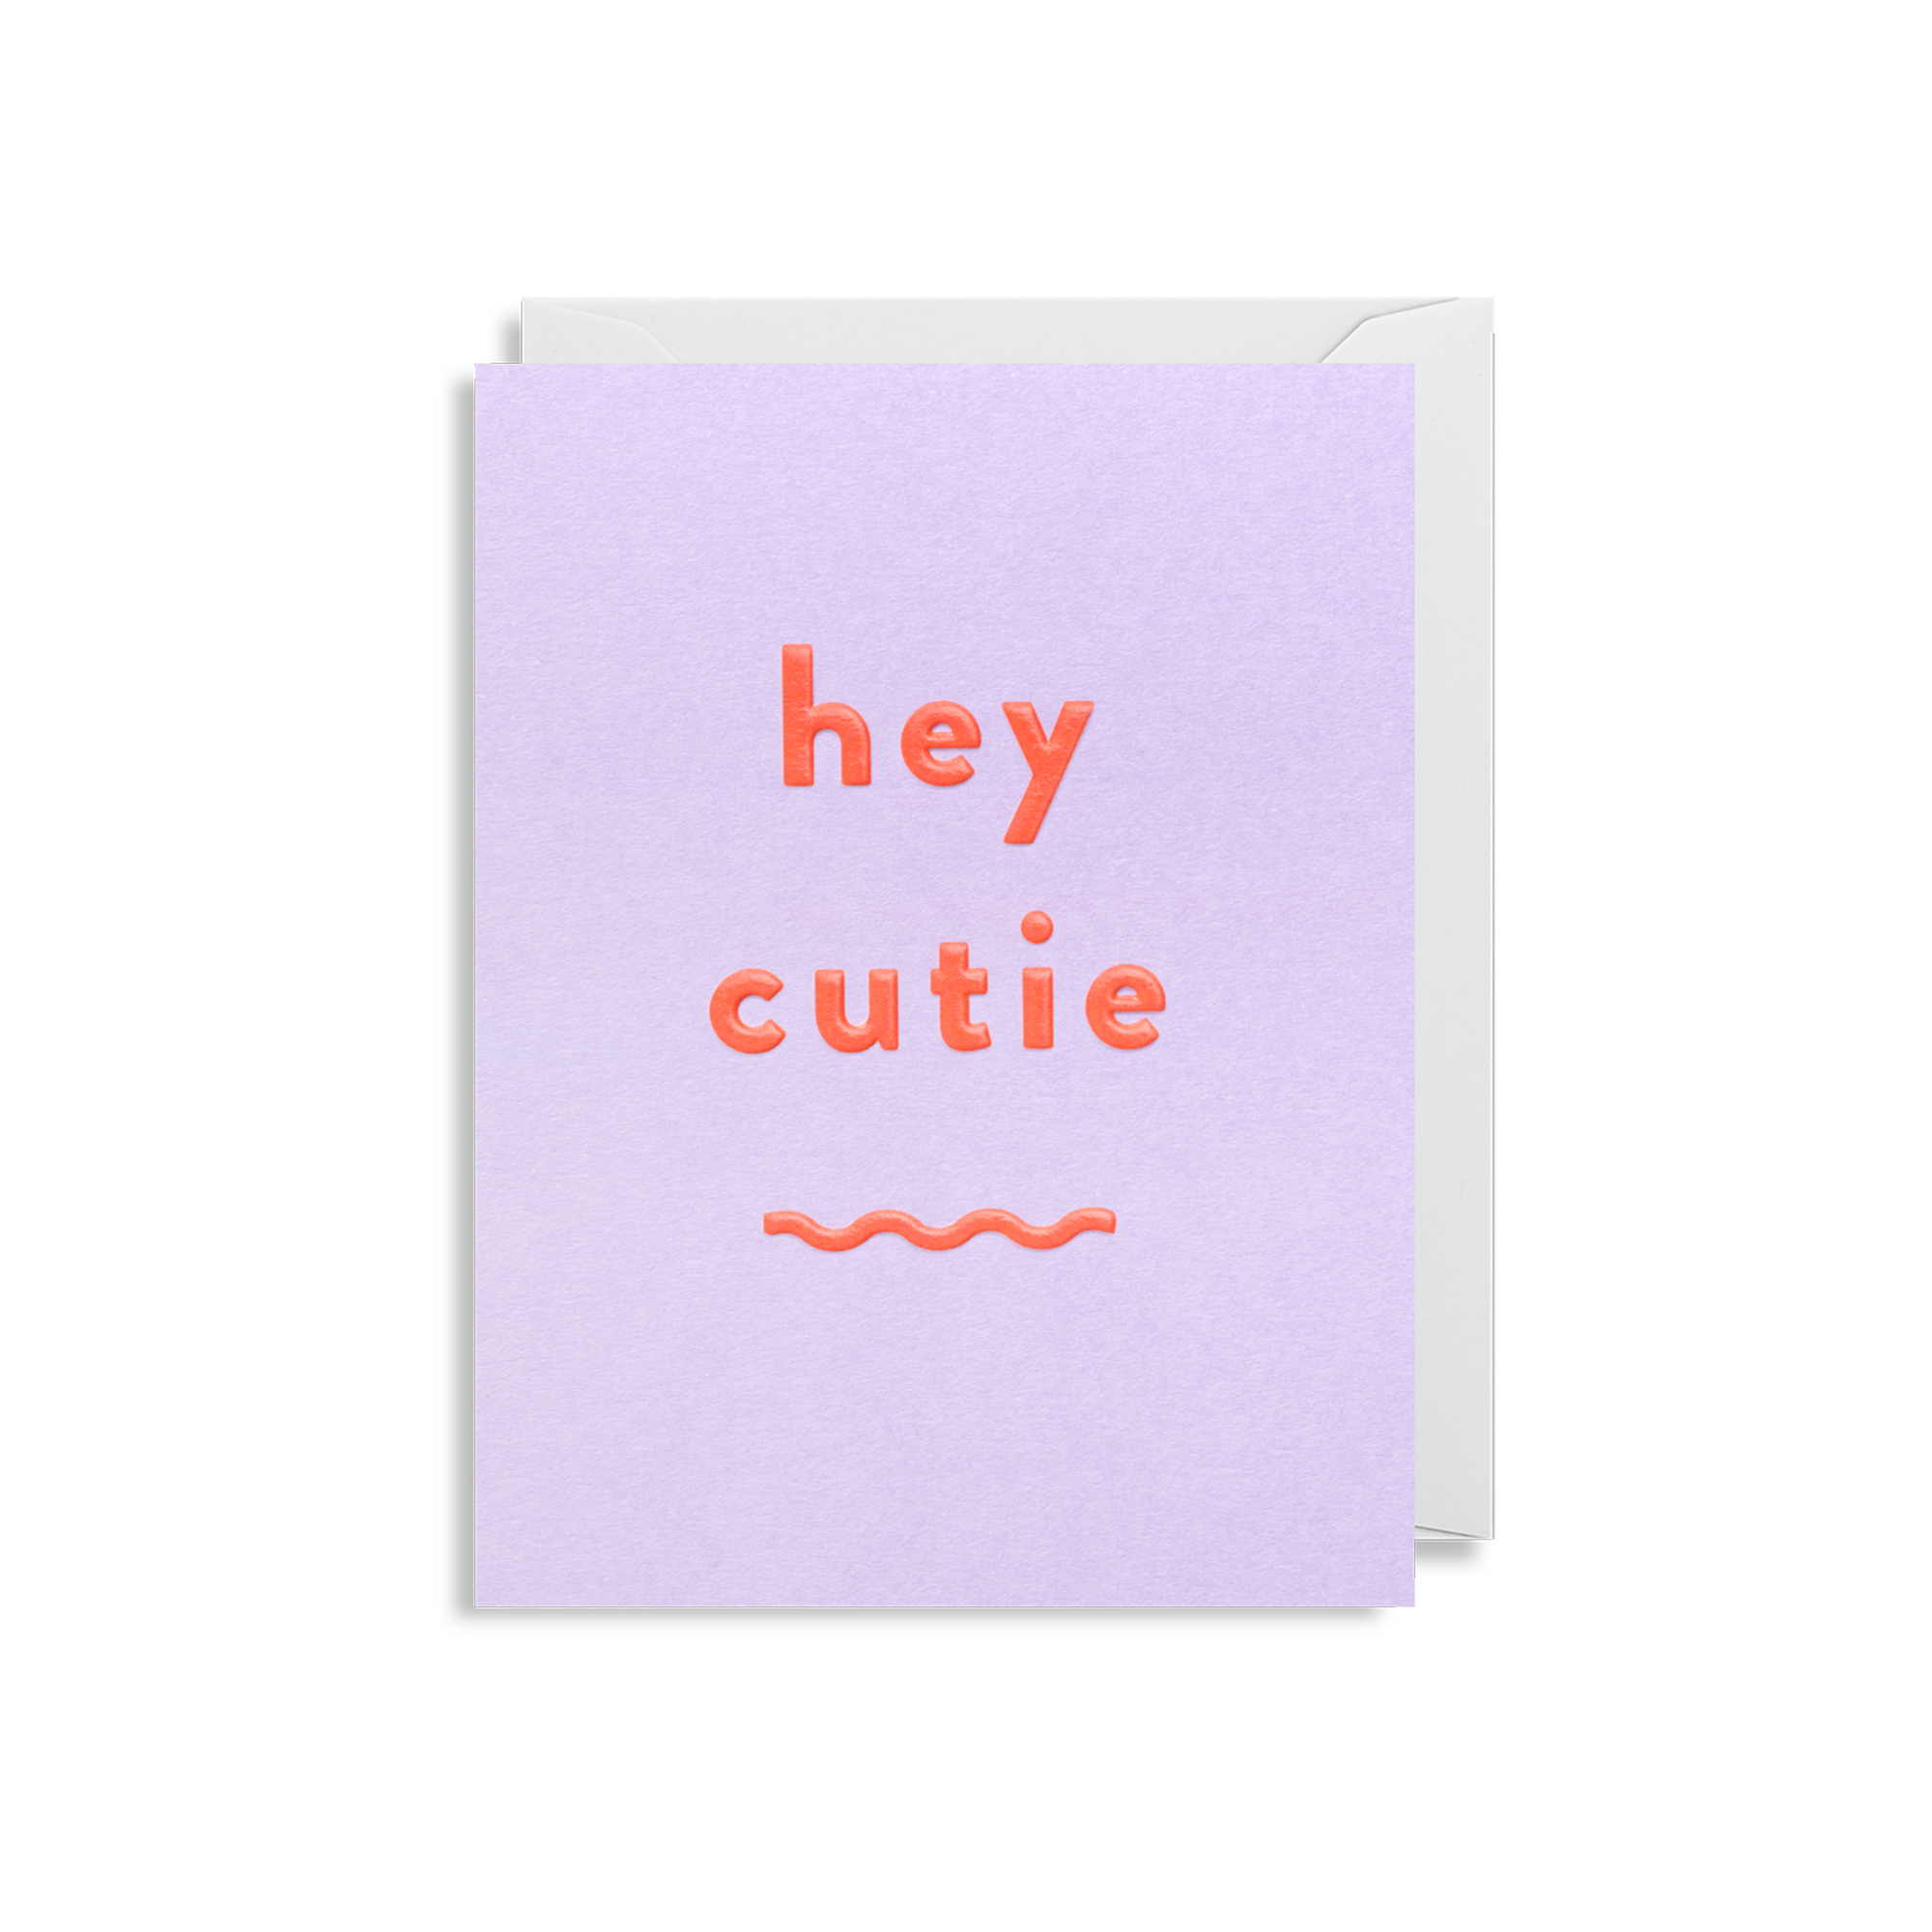 Greeting card with "hey cutie" text, comes with envelope.